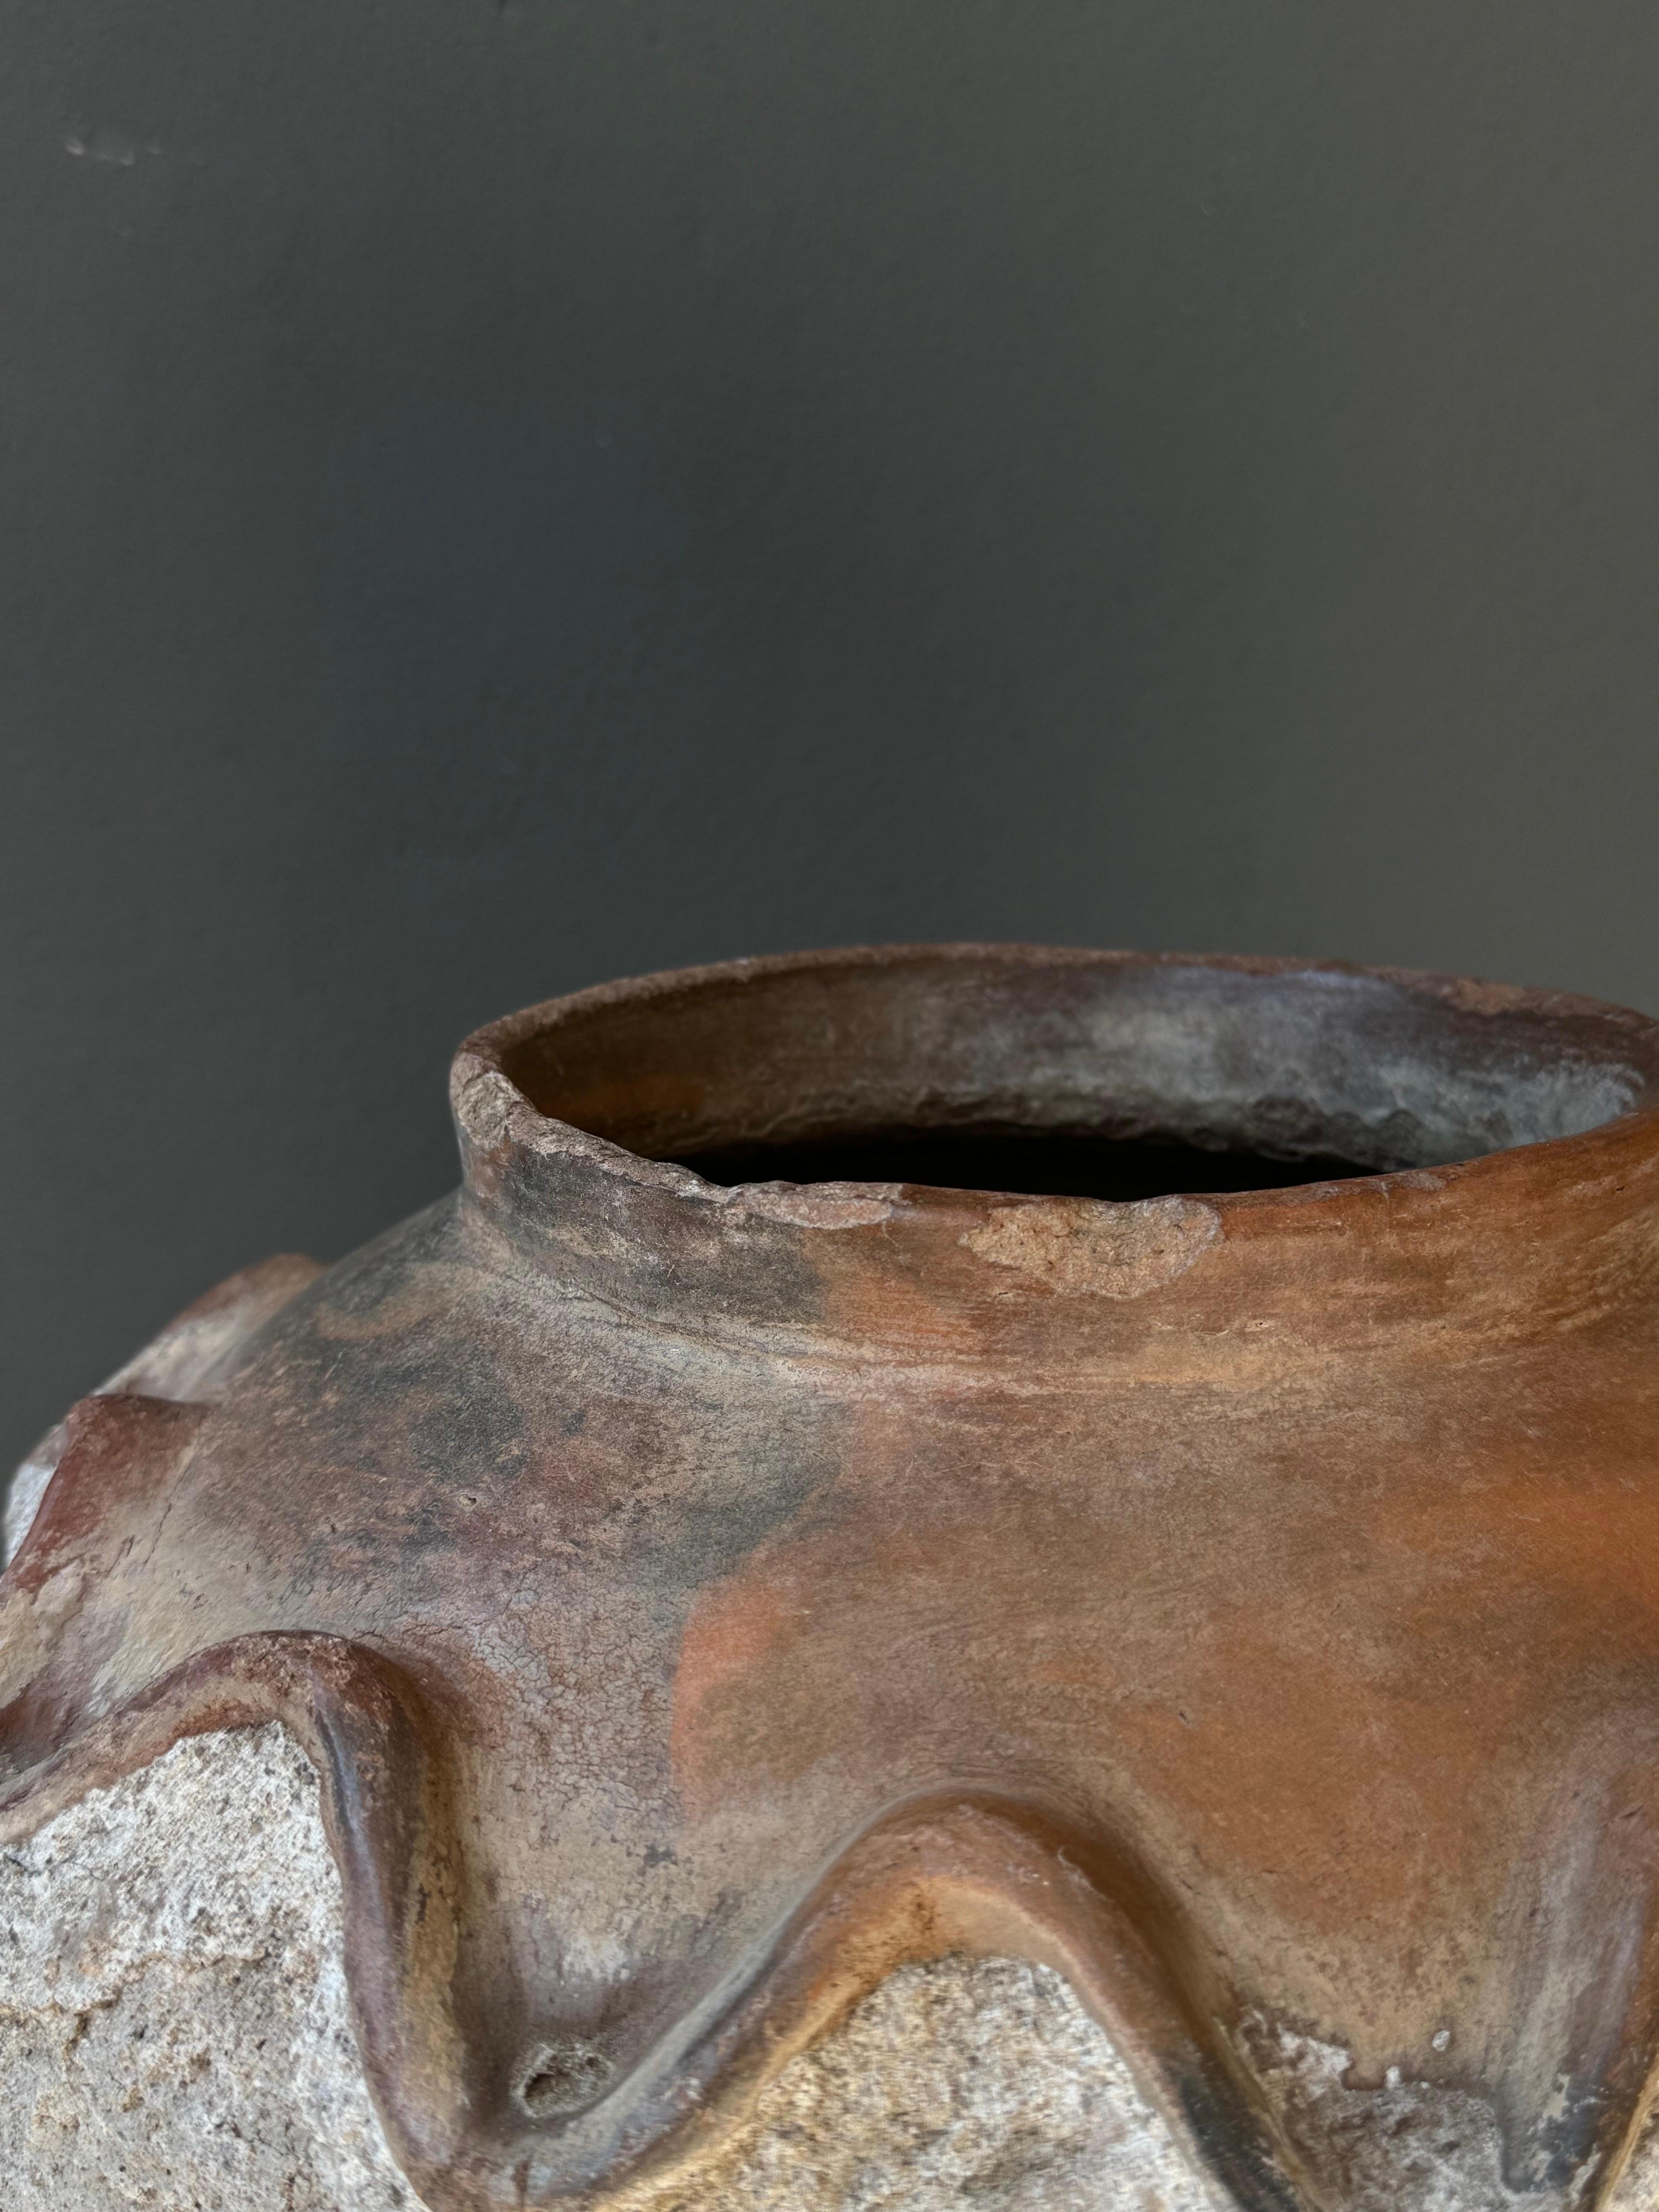 Ceramic Terracotta Water Vessel From Central Michoacan, Mexico, Early 20th Century